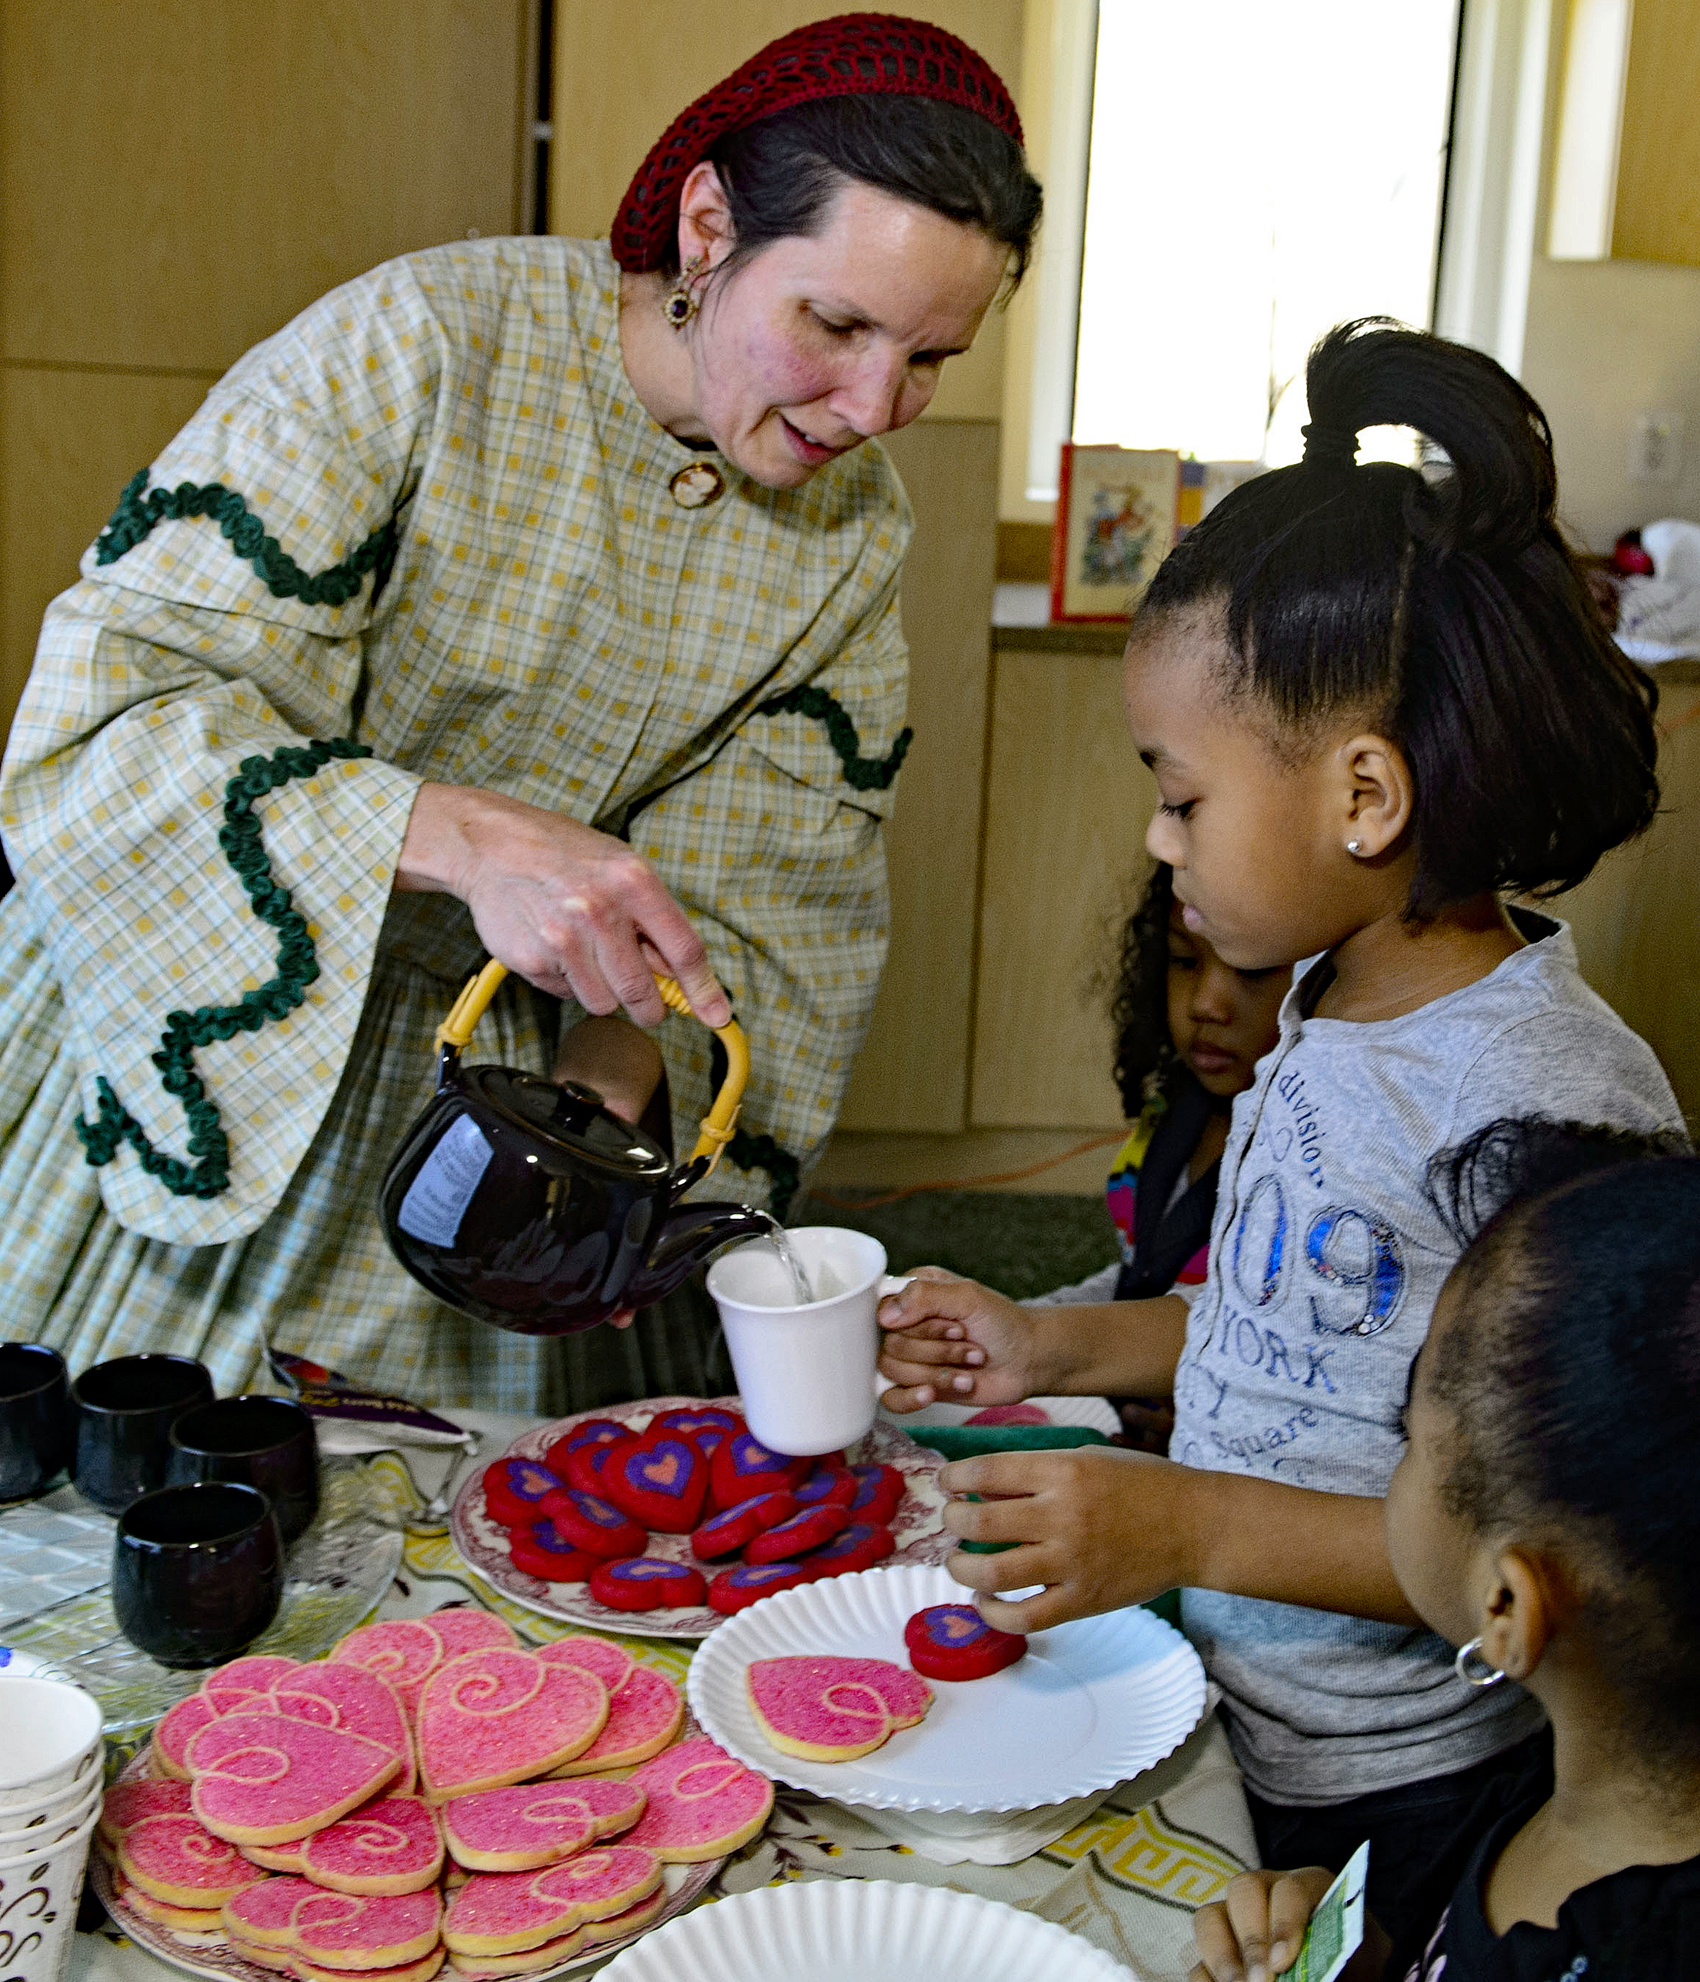 Docent in costume pours tea for a young child